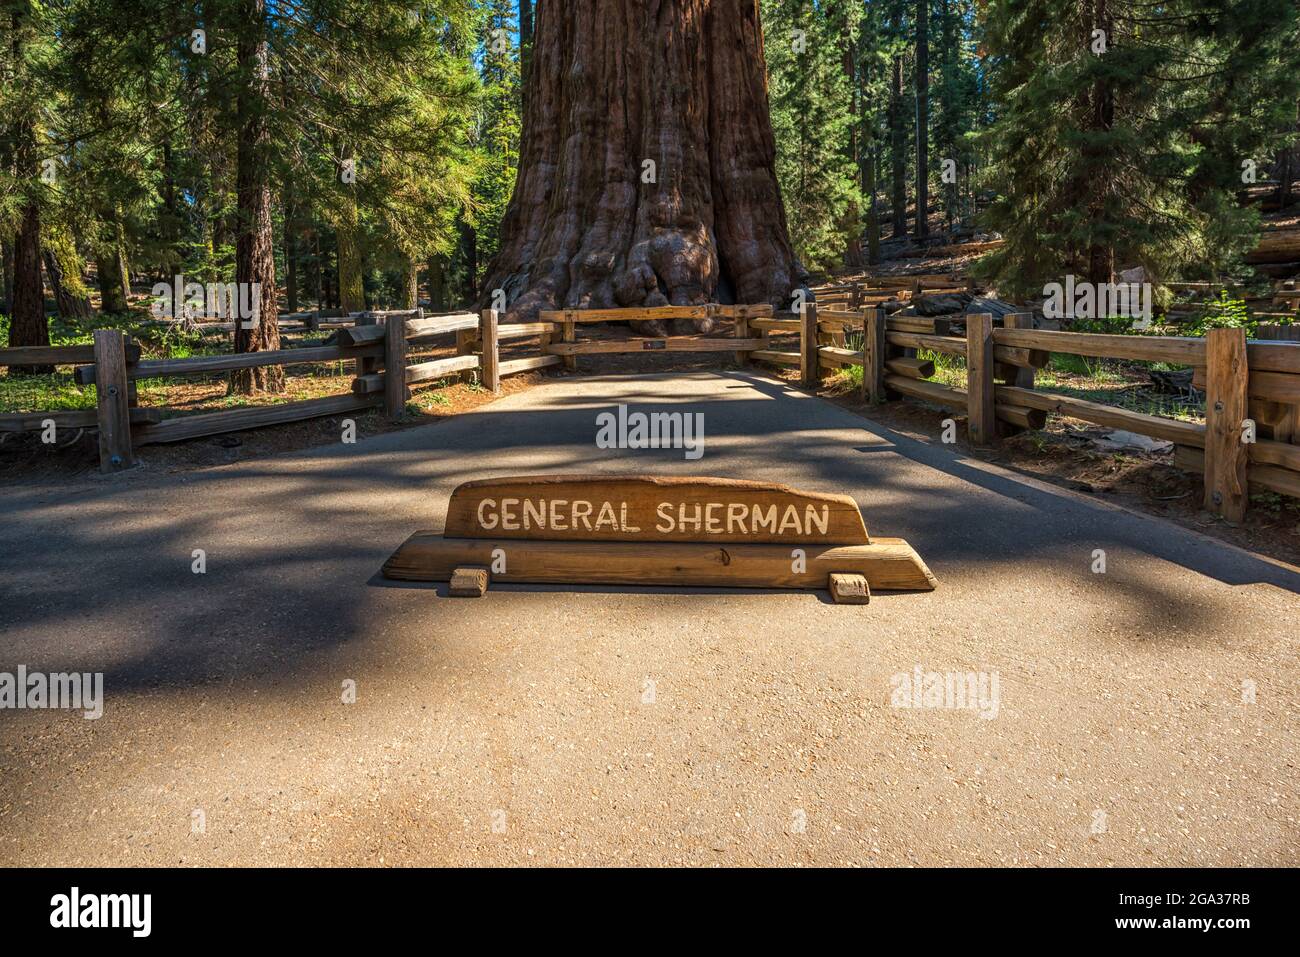 The iconic General Sherman Tree. Sequoia National Park, California, USA. Stock Photo